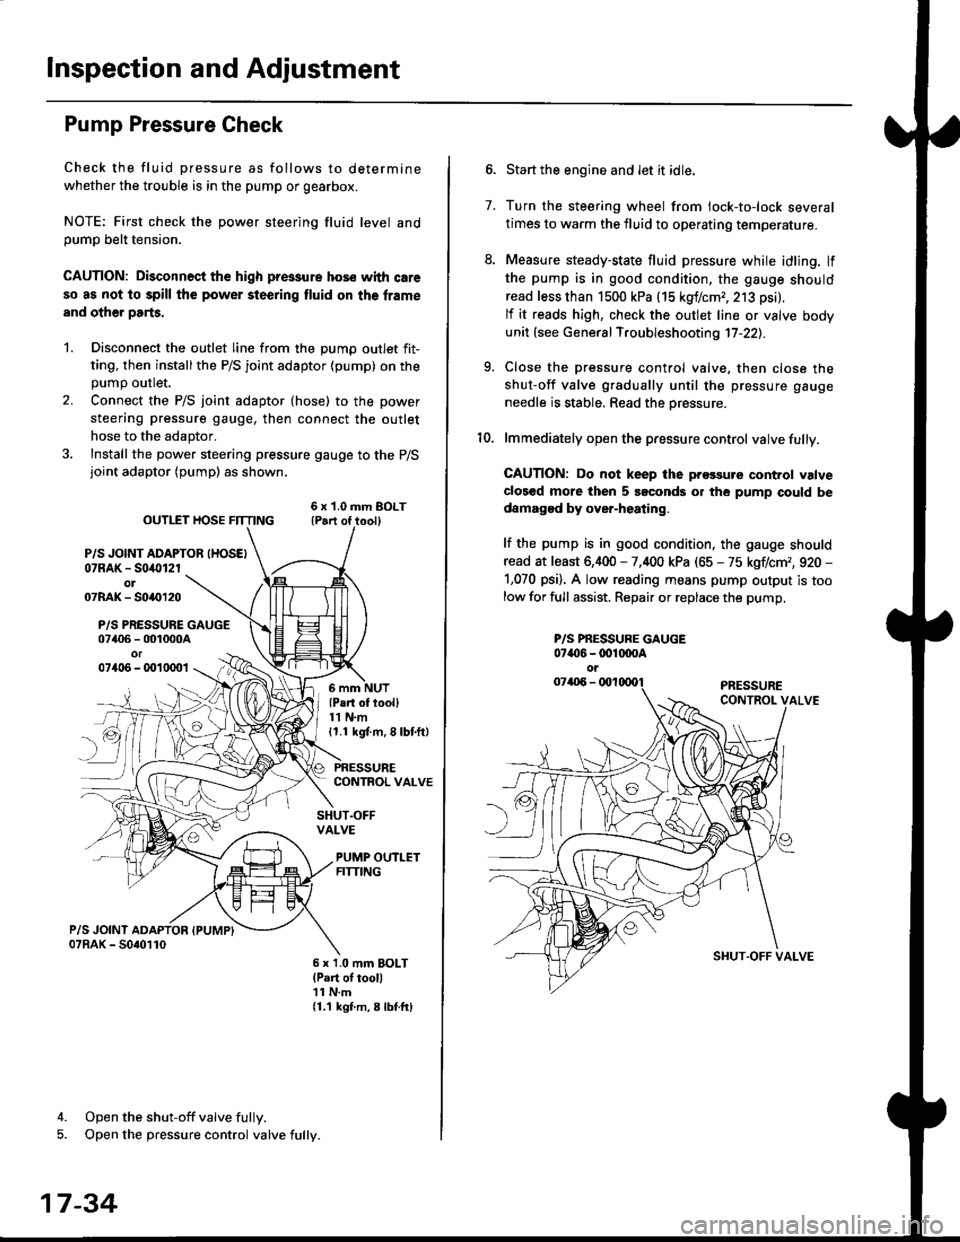 HONDA CIVIC 1998 6.G Workshop Manual lnspection and Adjustment
Pump Pressure Check
Check the fluid pressure as follows to determine
whether the trouble is in the pump or gearbox.
NOTE: First check the power steering fluid level andpump b